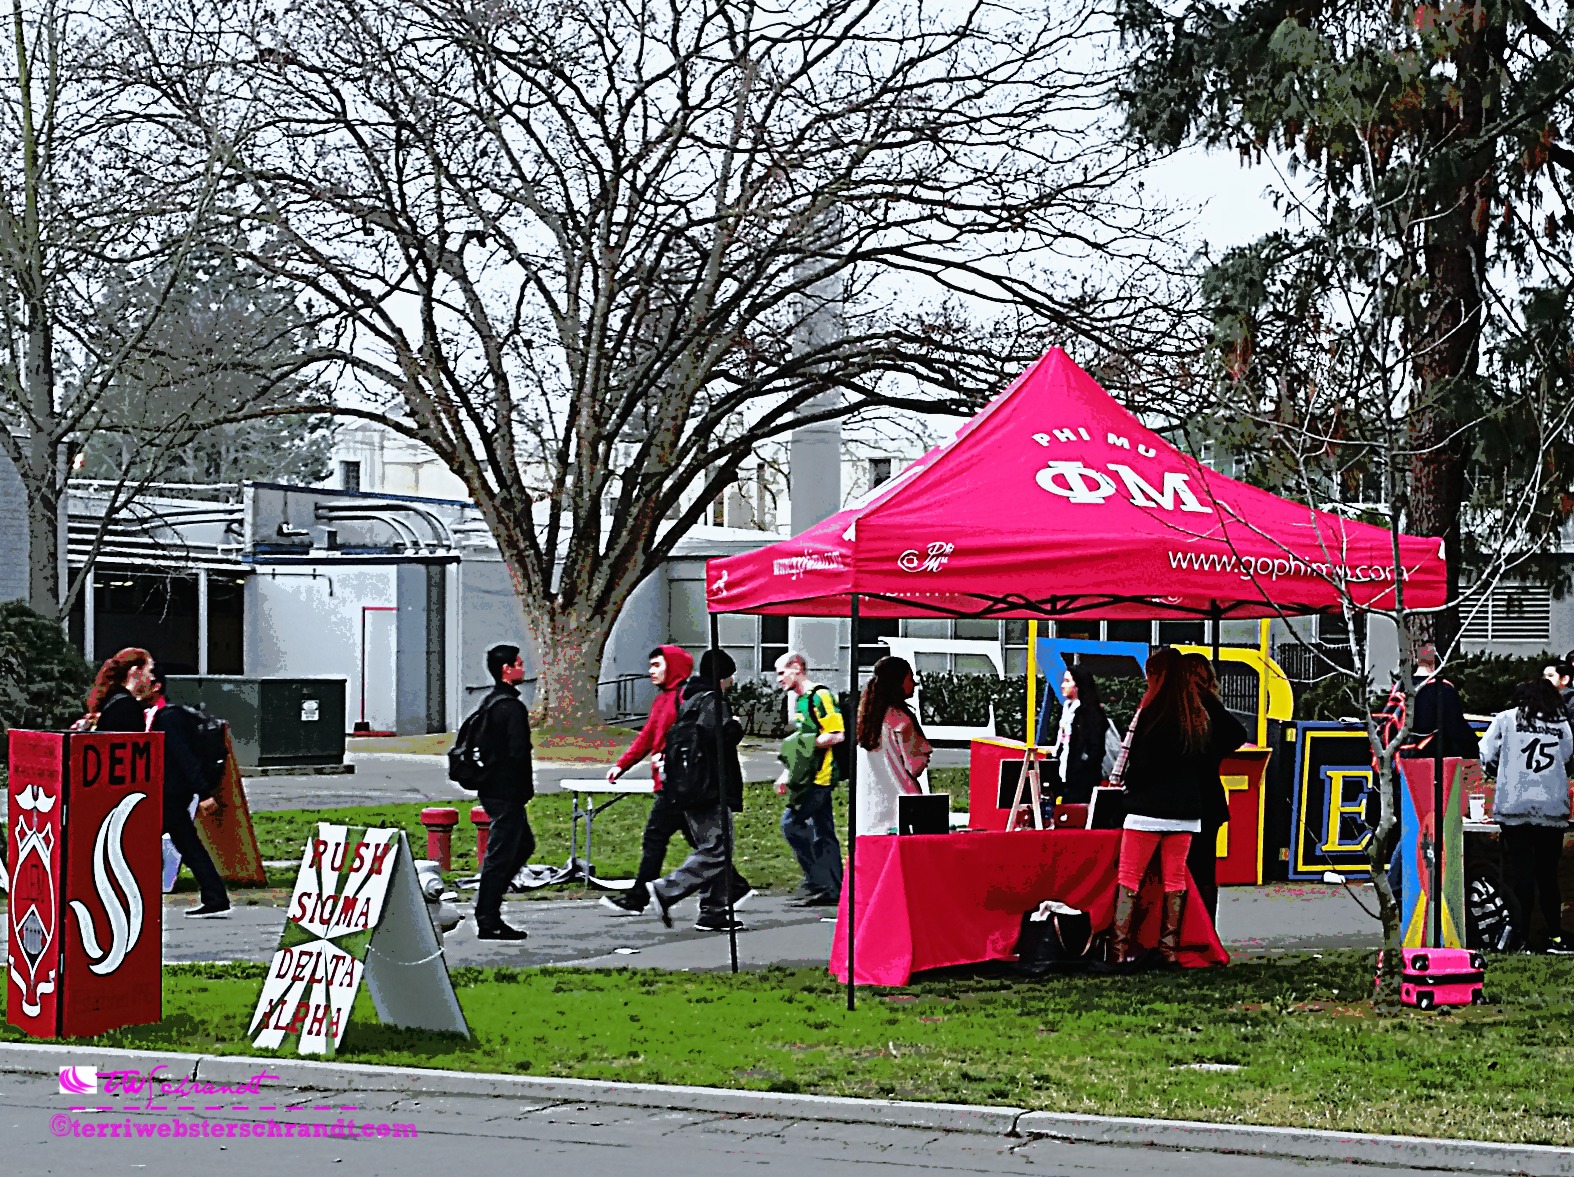 A bright pink tent beckons vibrant college students to explore leisure activities on campus.